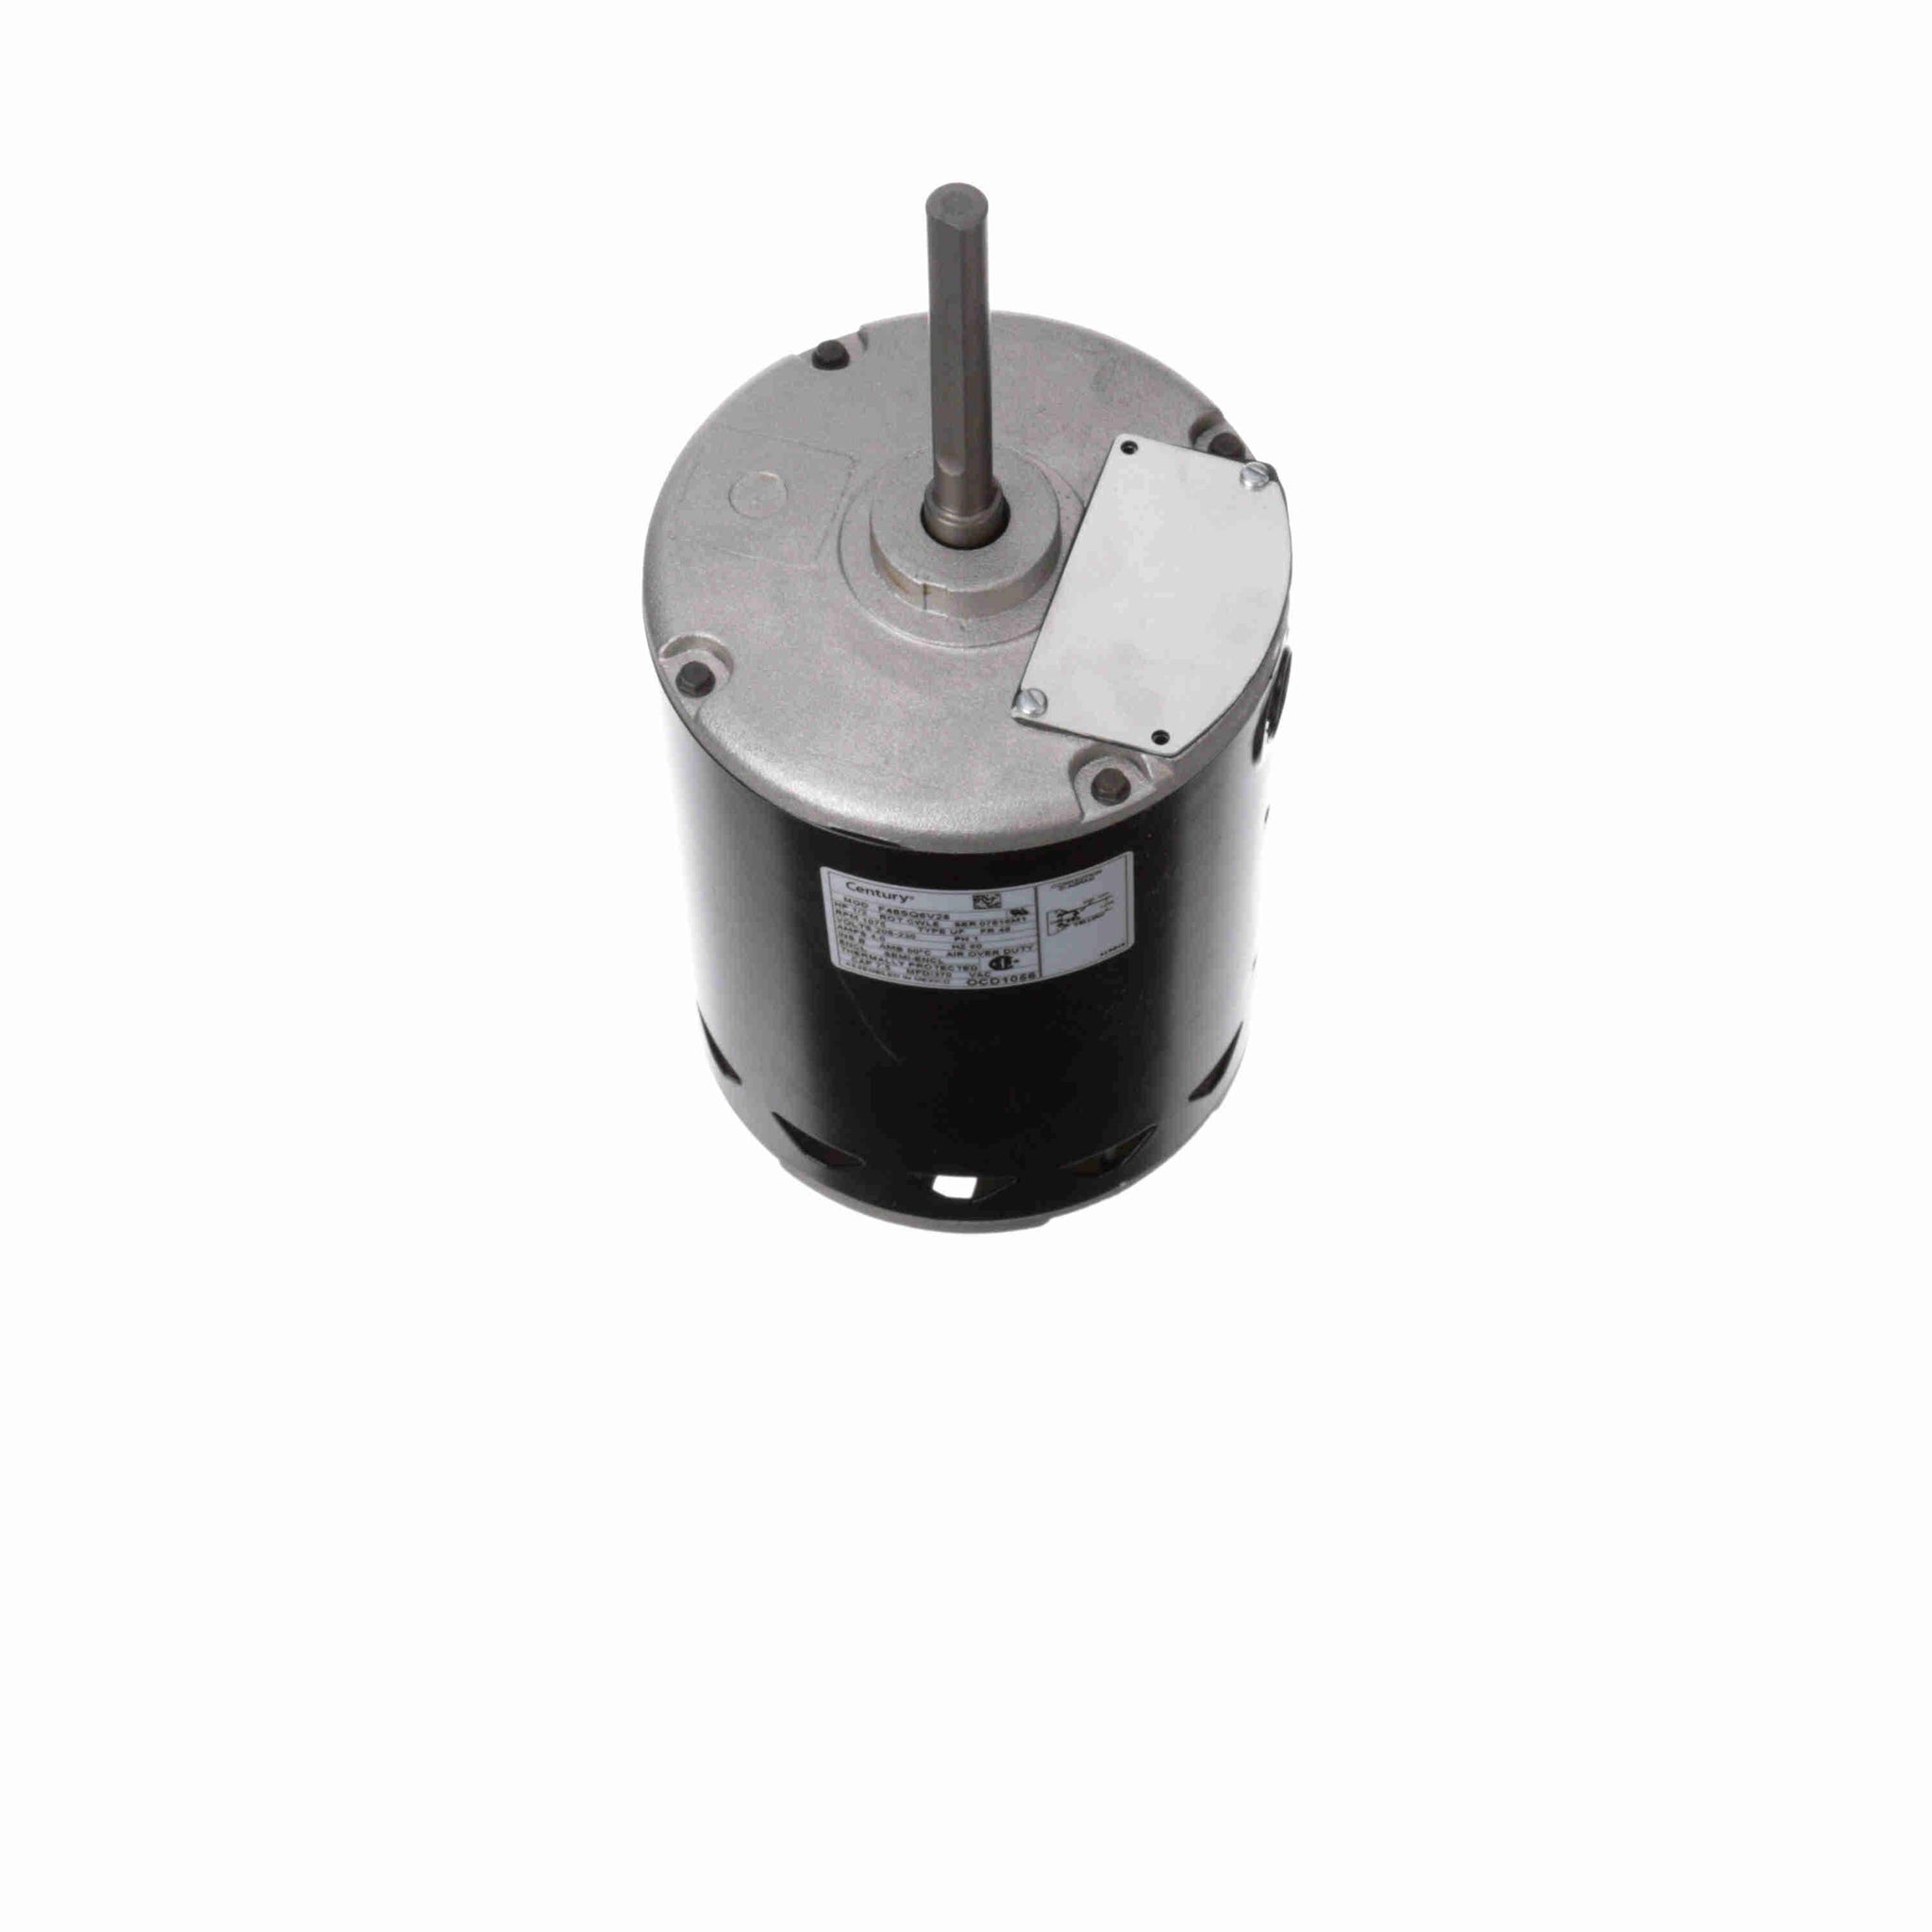 OCD1056 - 1/2 HP OEM Replacement Motor, 1075 RPM, 208-230 Volts, 48 Frame, OAO - Hardware & Moreee